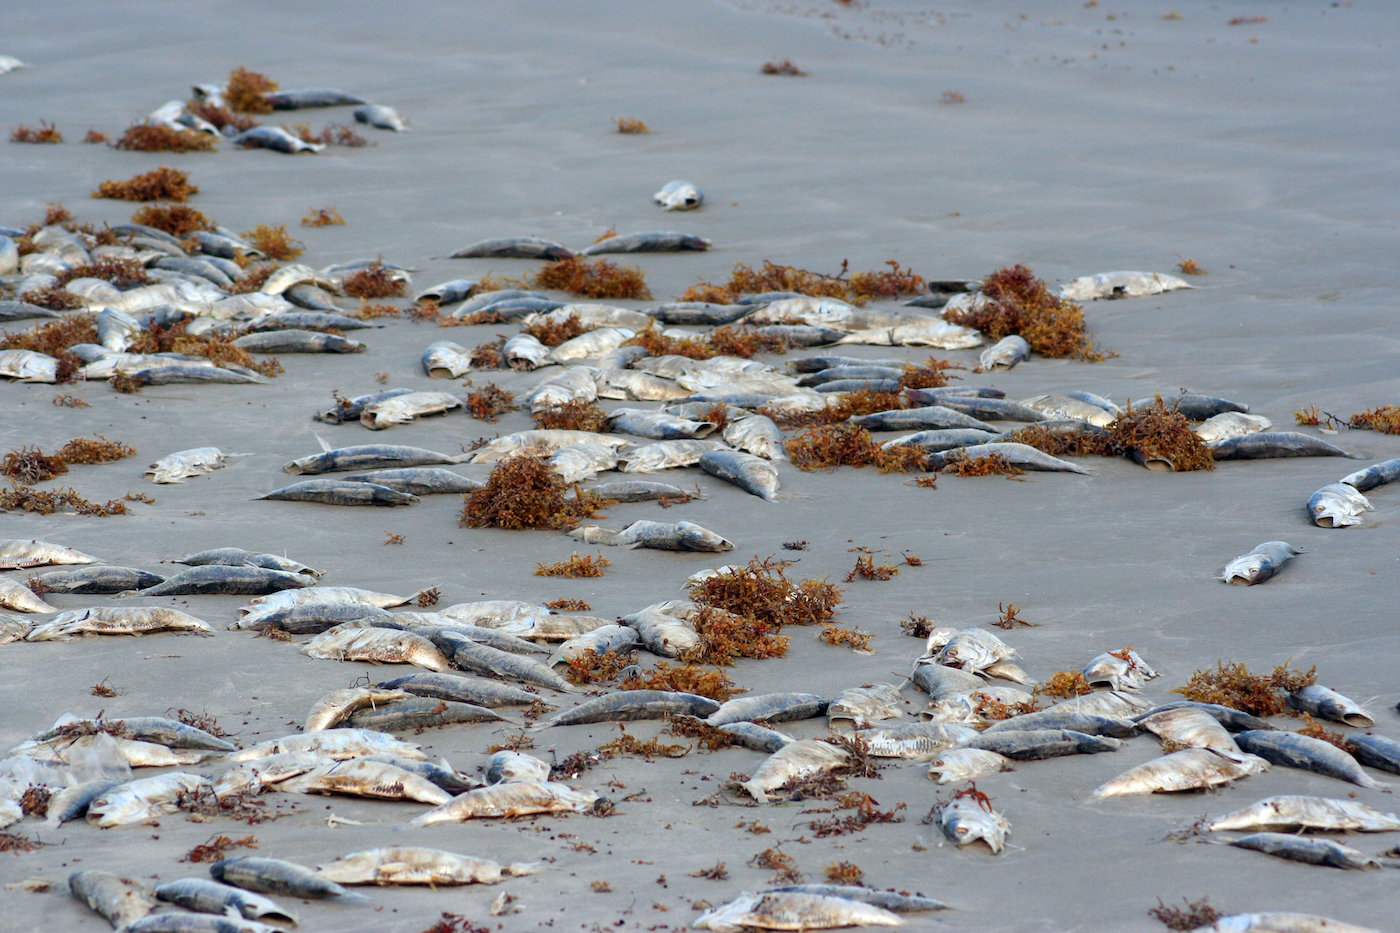 Dozens of dead silver fish piled on top of each other and side by side among read kelp on a beach. 